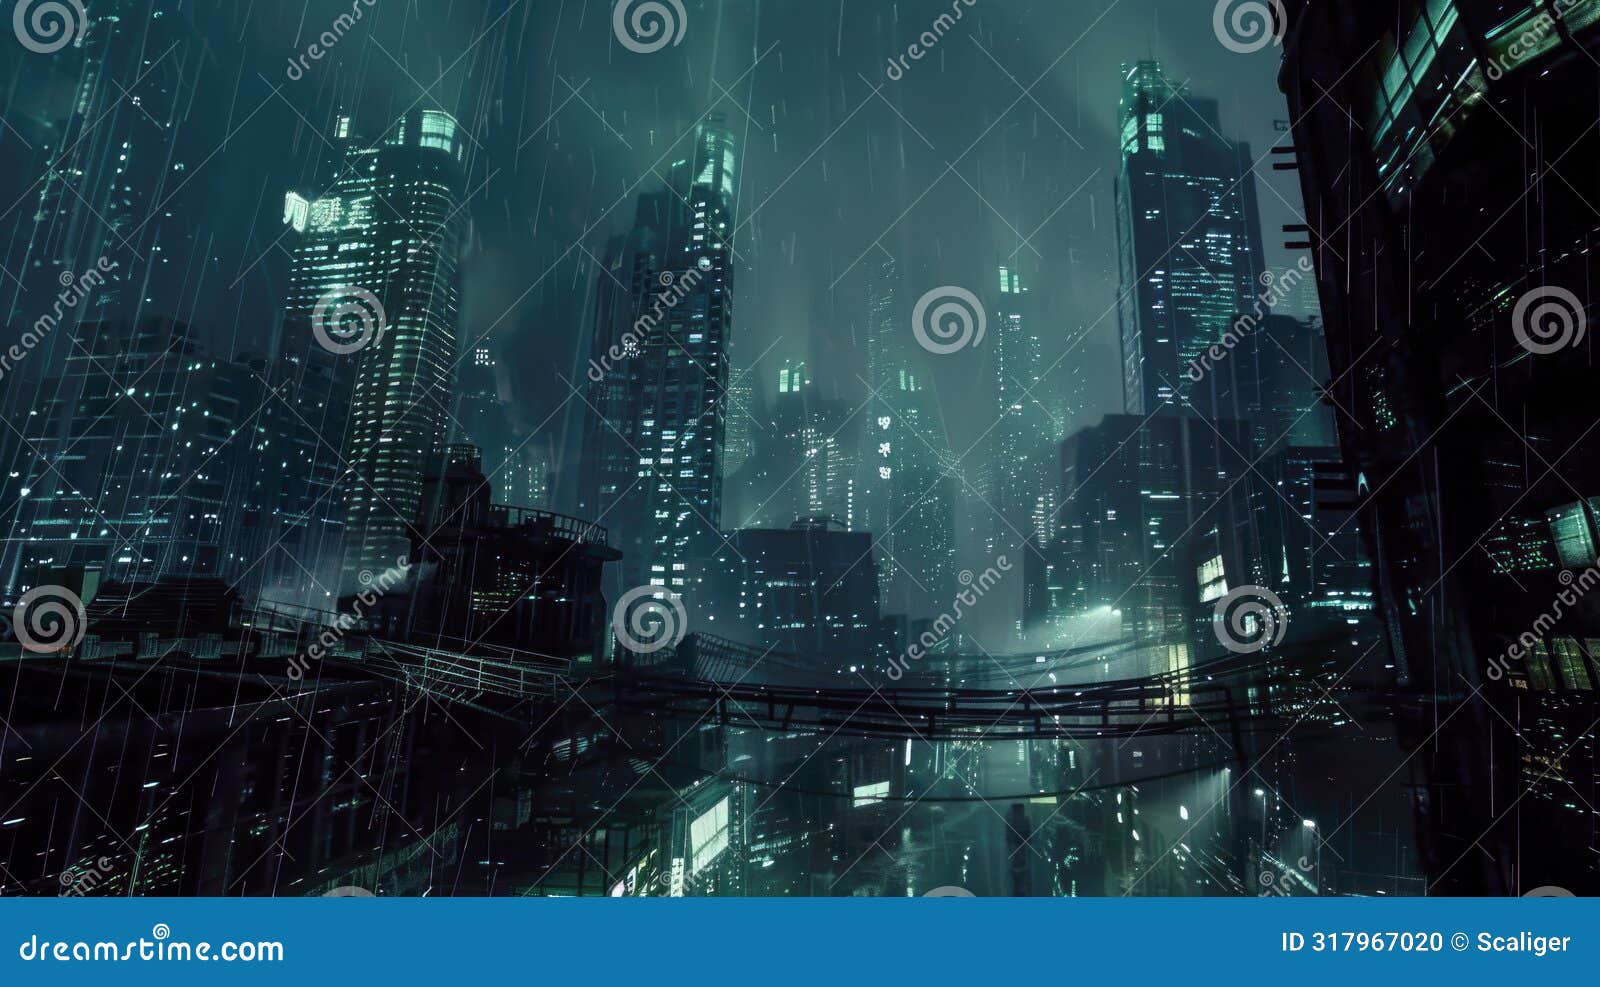 storm in cyberpunk city at night, dramatic aerial view of modern buildings in rain. concept of dystopia, future, skyscraper,